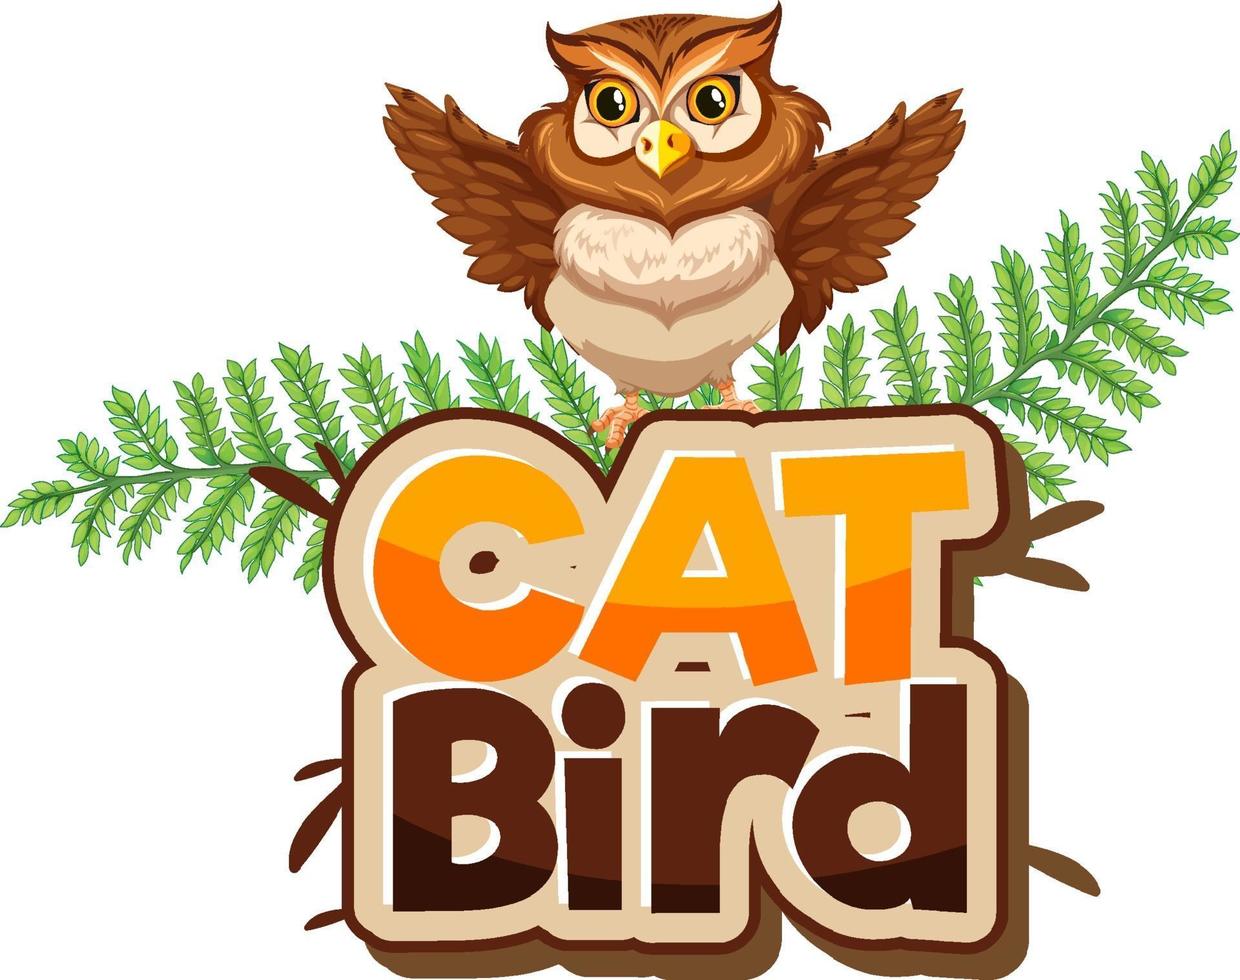 Owl cartoon character with Cat Bird font banner isolated vector